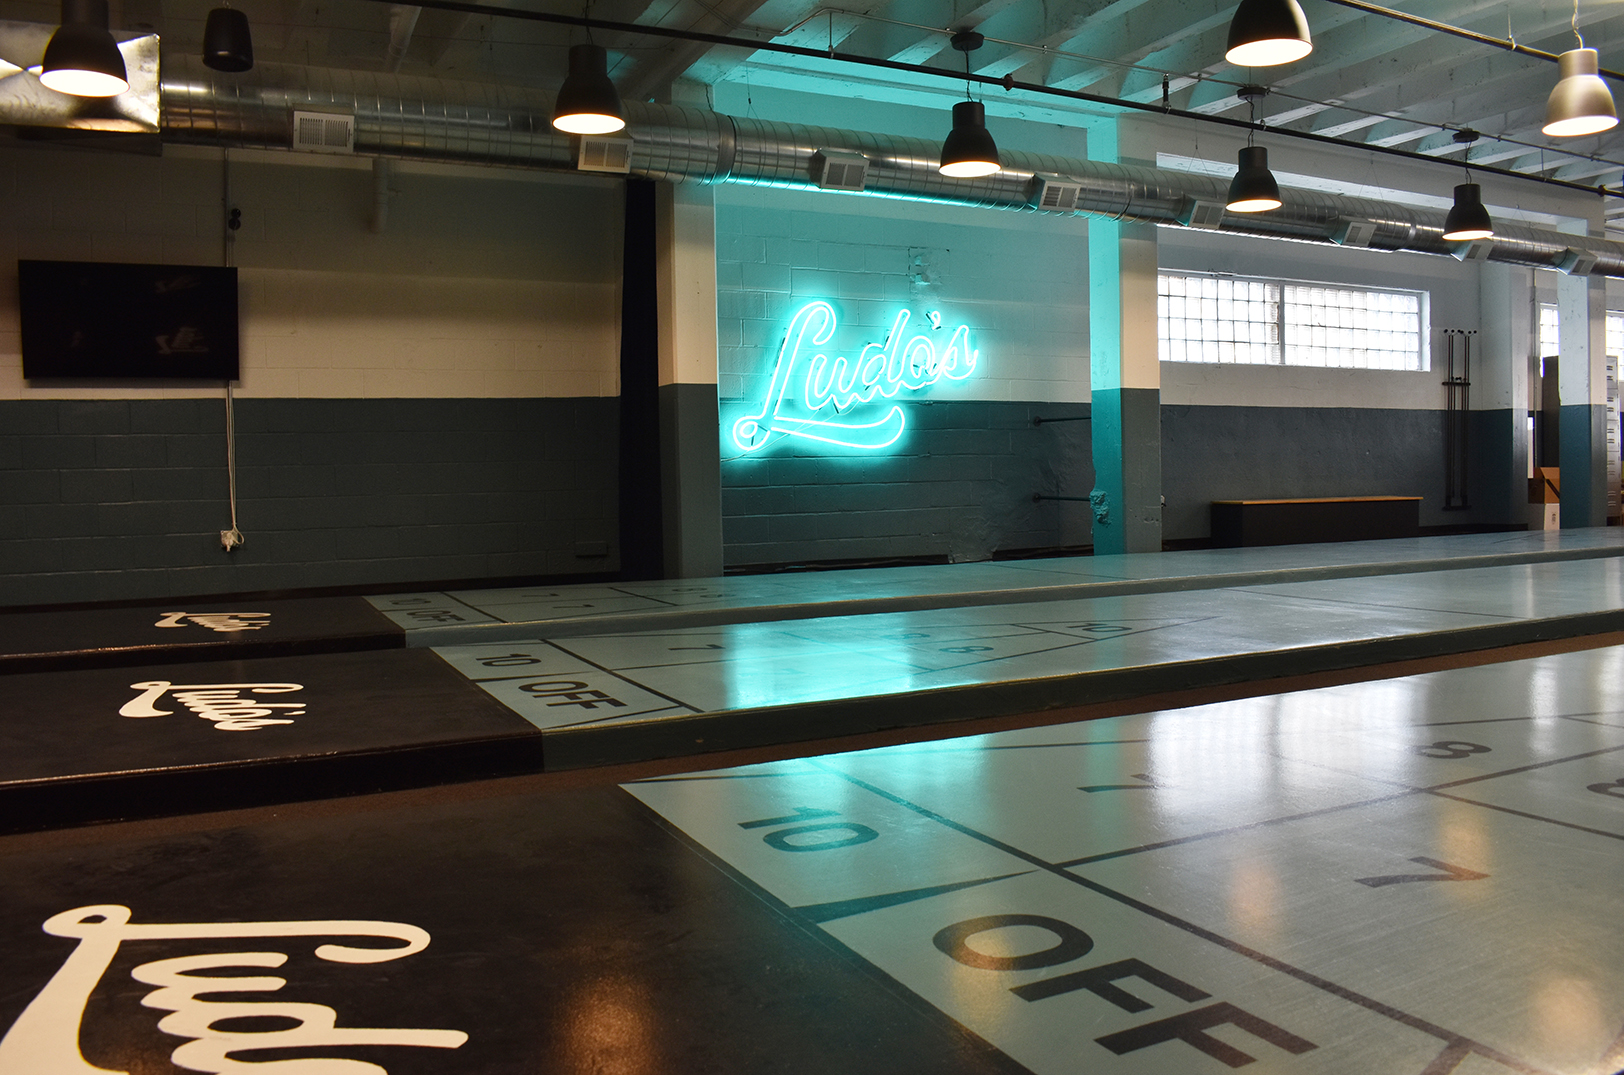 Take a peek down Ludo’s lanes before Made in KC’s new shuffleboard bar opens in Midtown